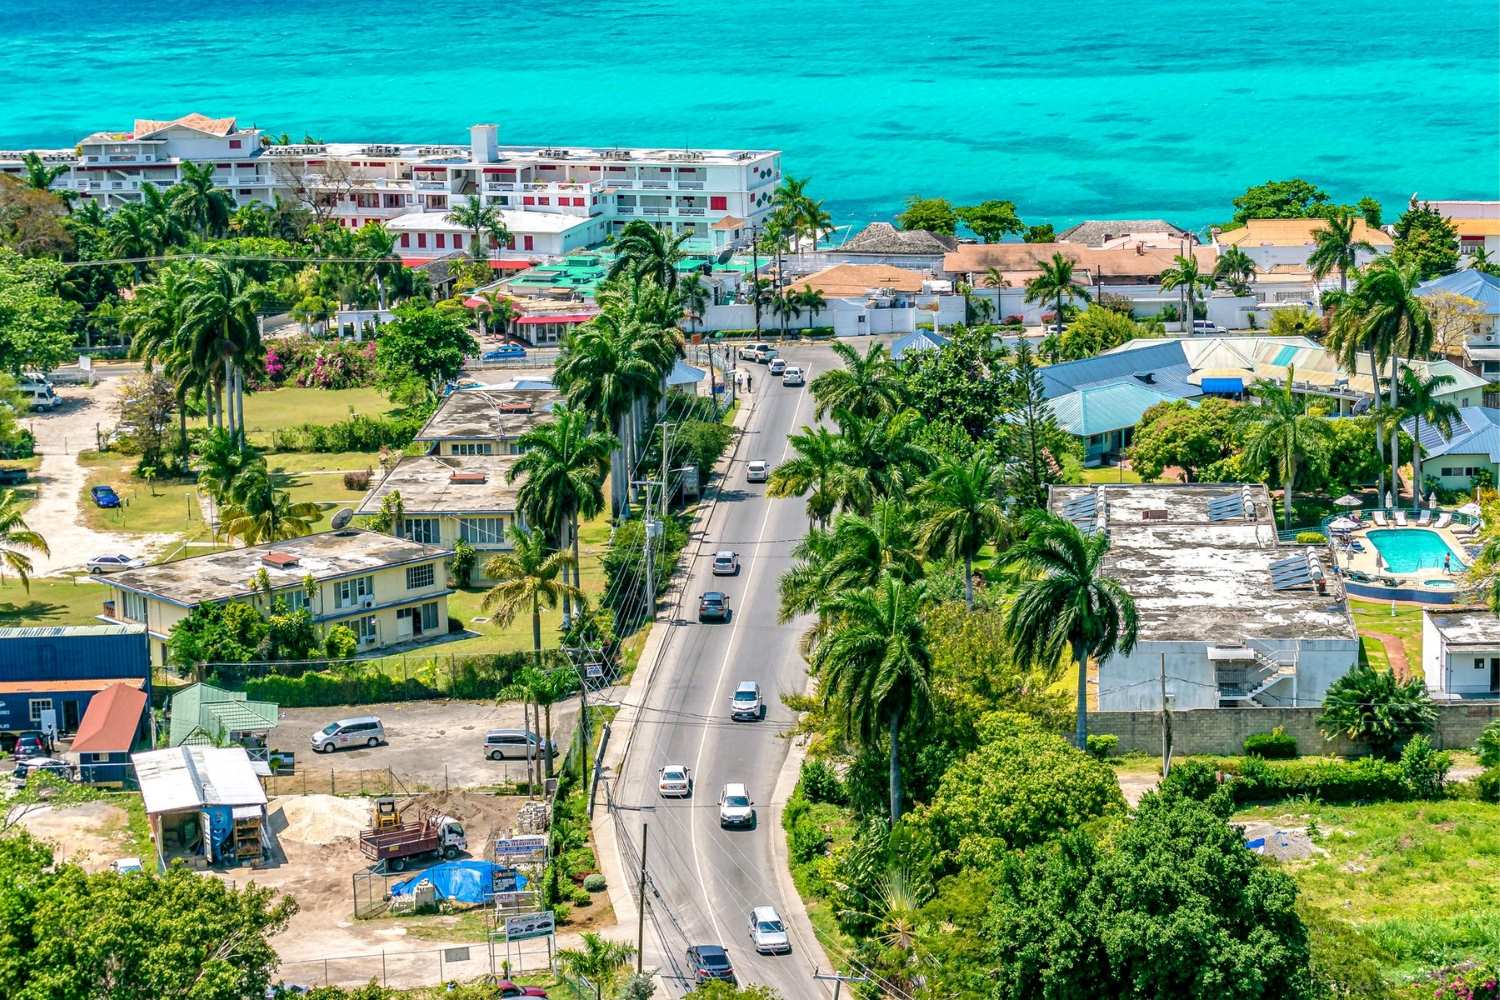 The Ultimate Guide To Jamaica's ZIP Code - Everything You Need To Know!